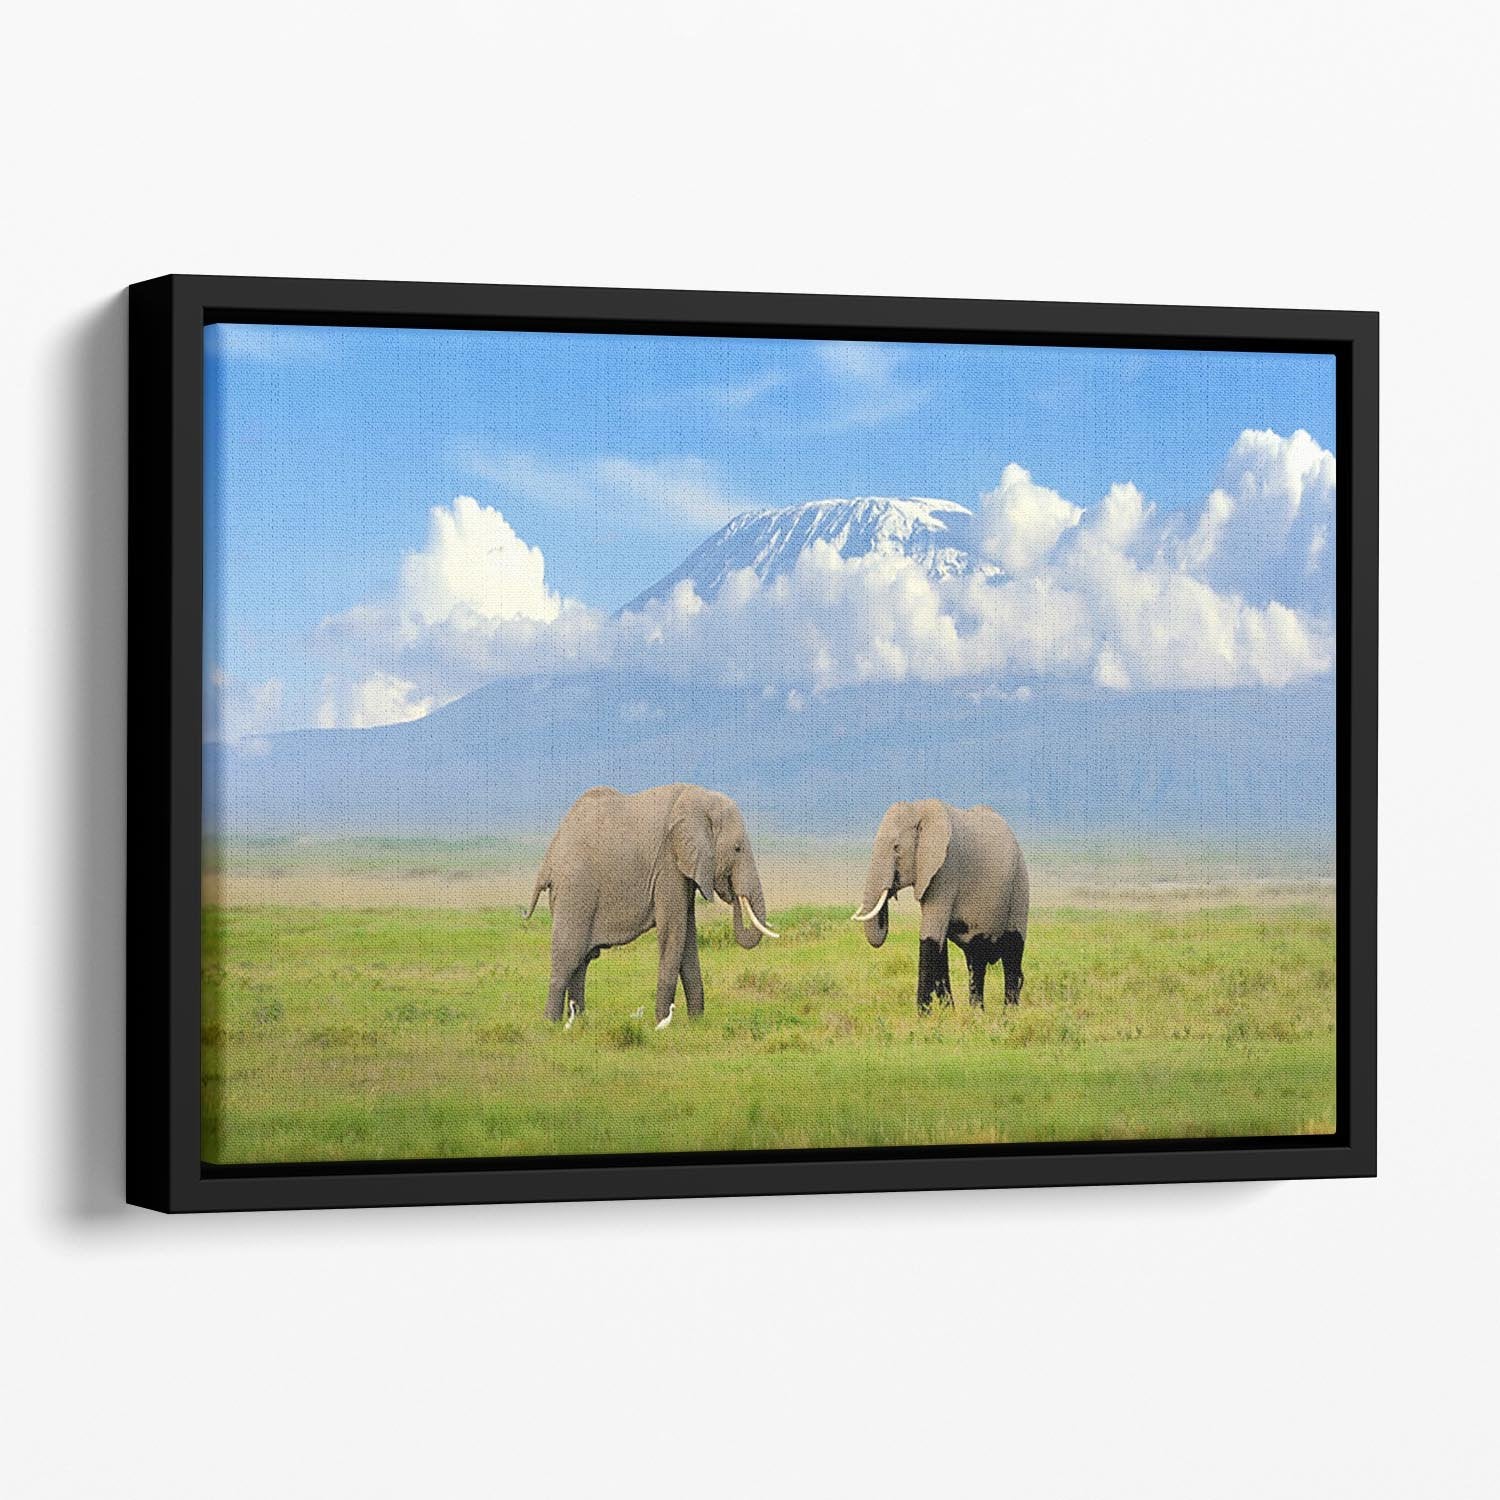 Elephant with Mount Kilimanjaro in the background Floating Framed Canvas - Canvas Art Rocks - 1